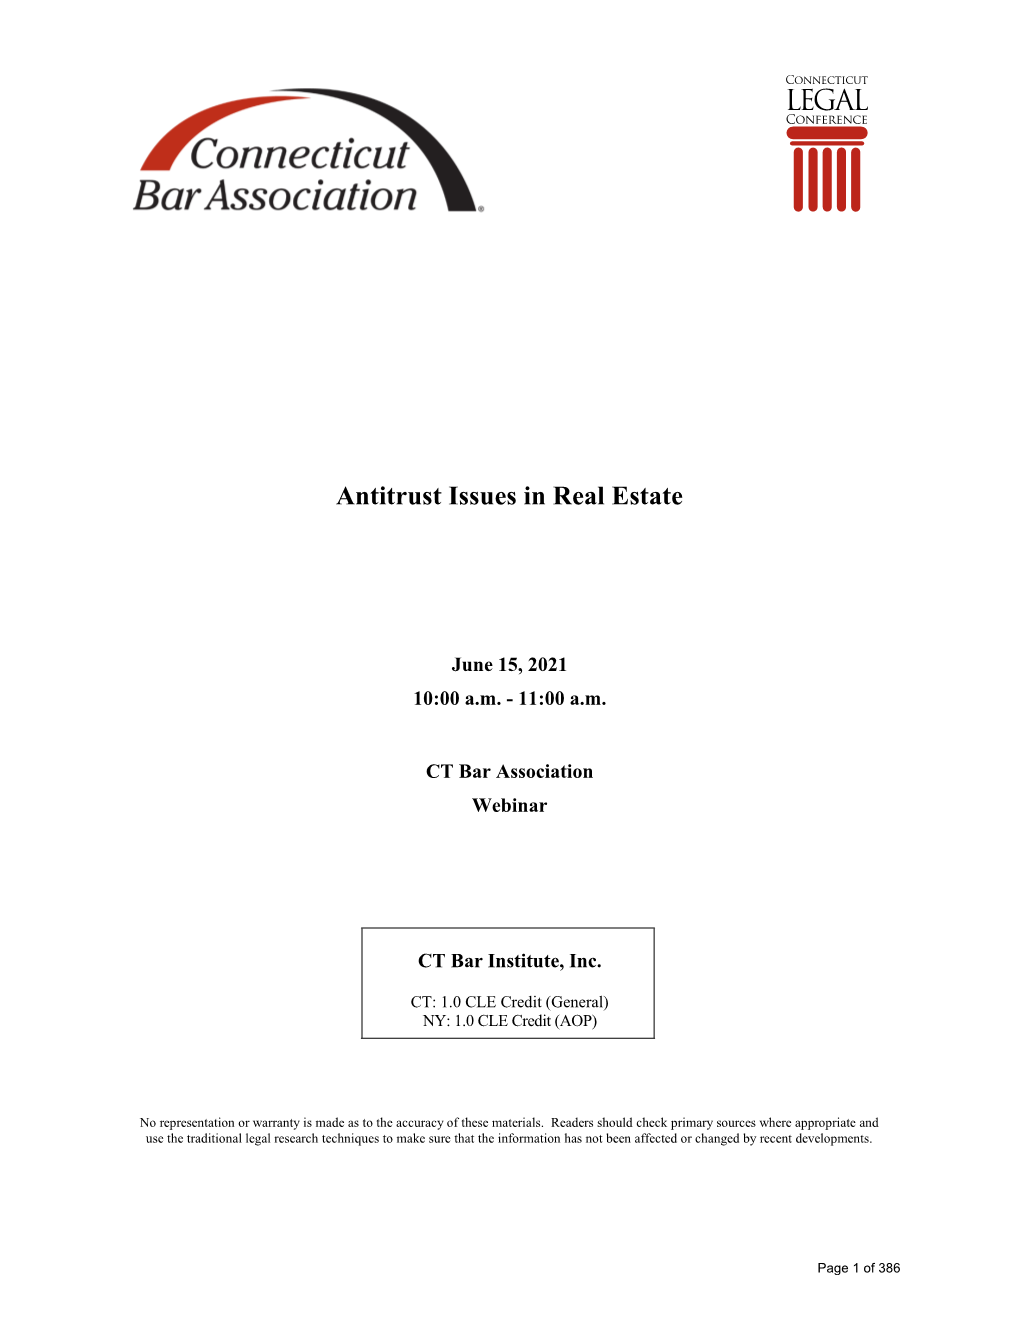 Antitrust Issues in Real Estate